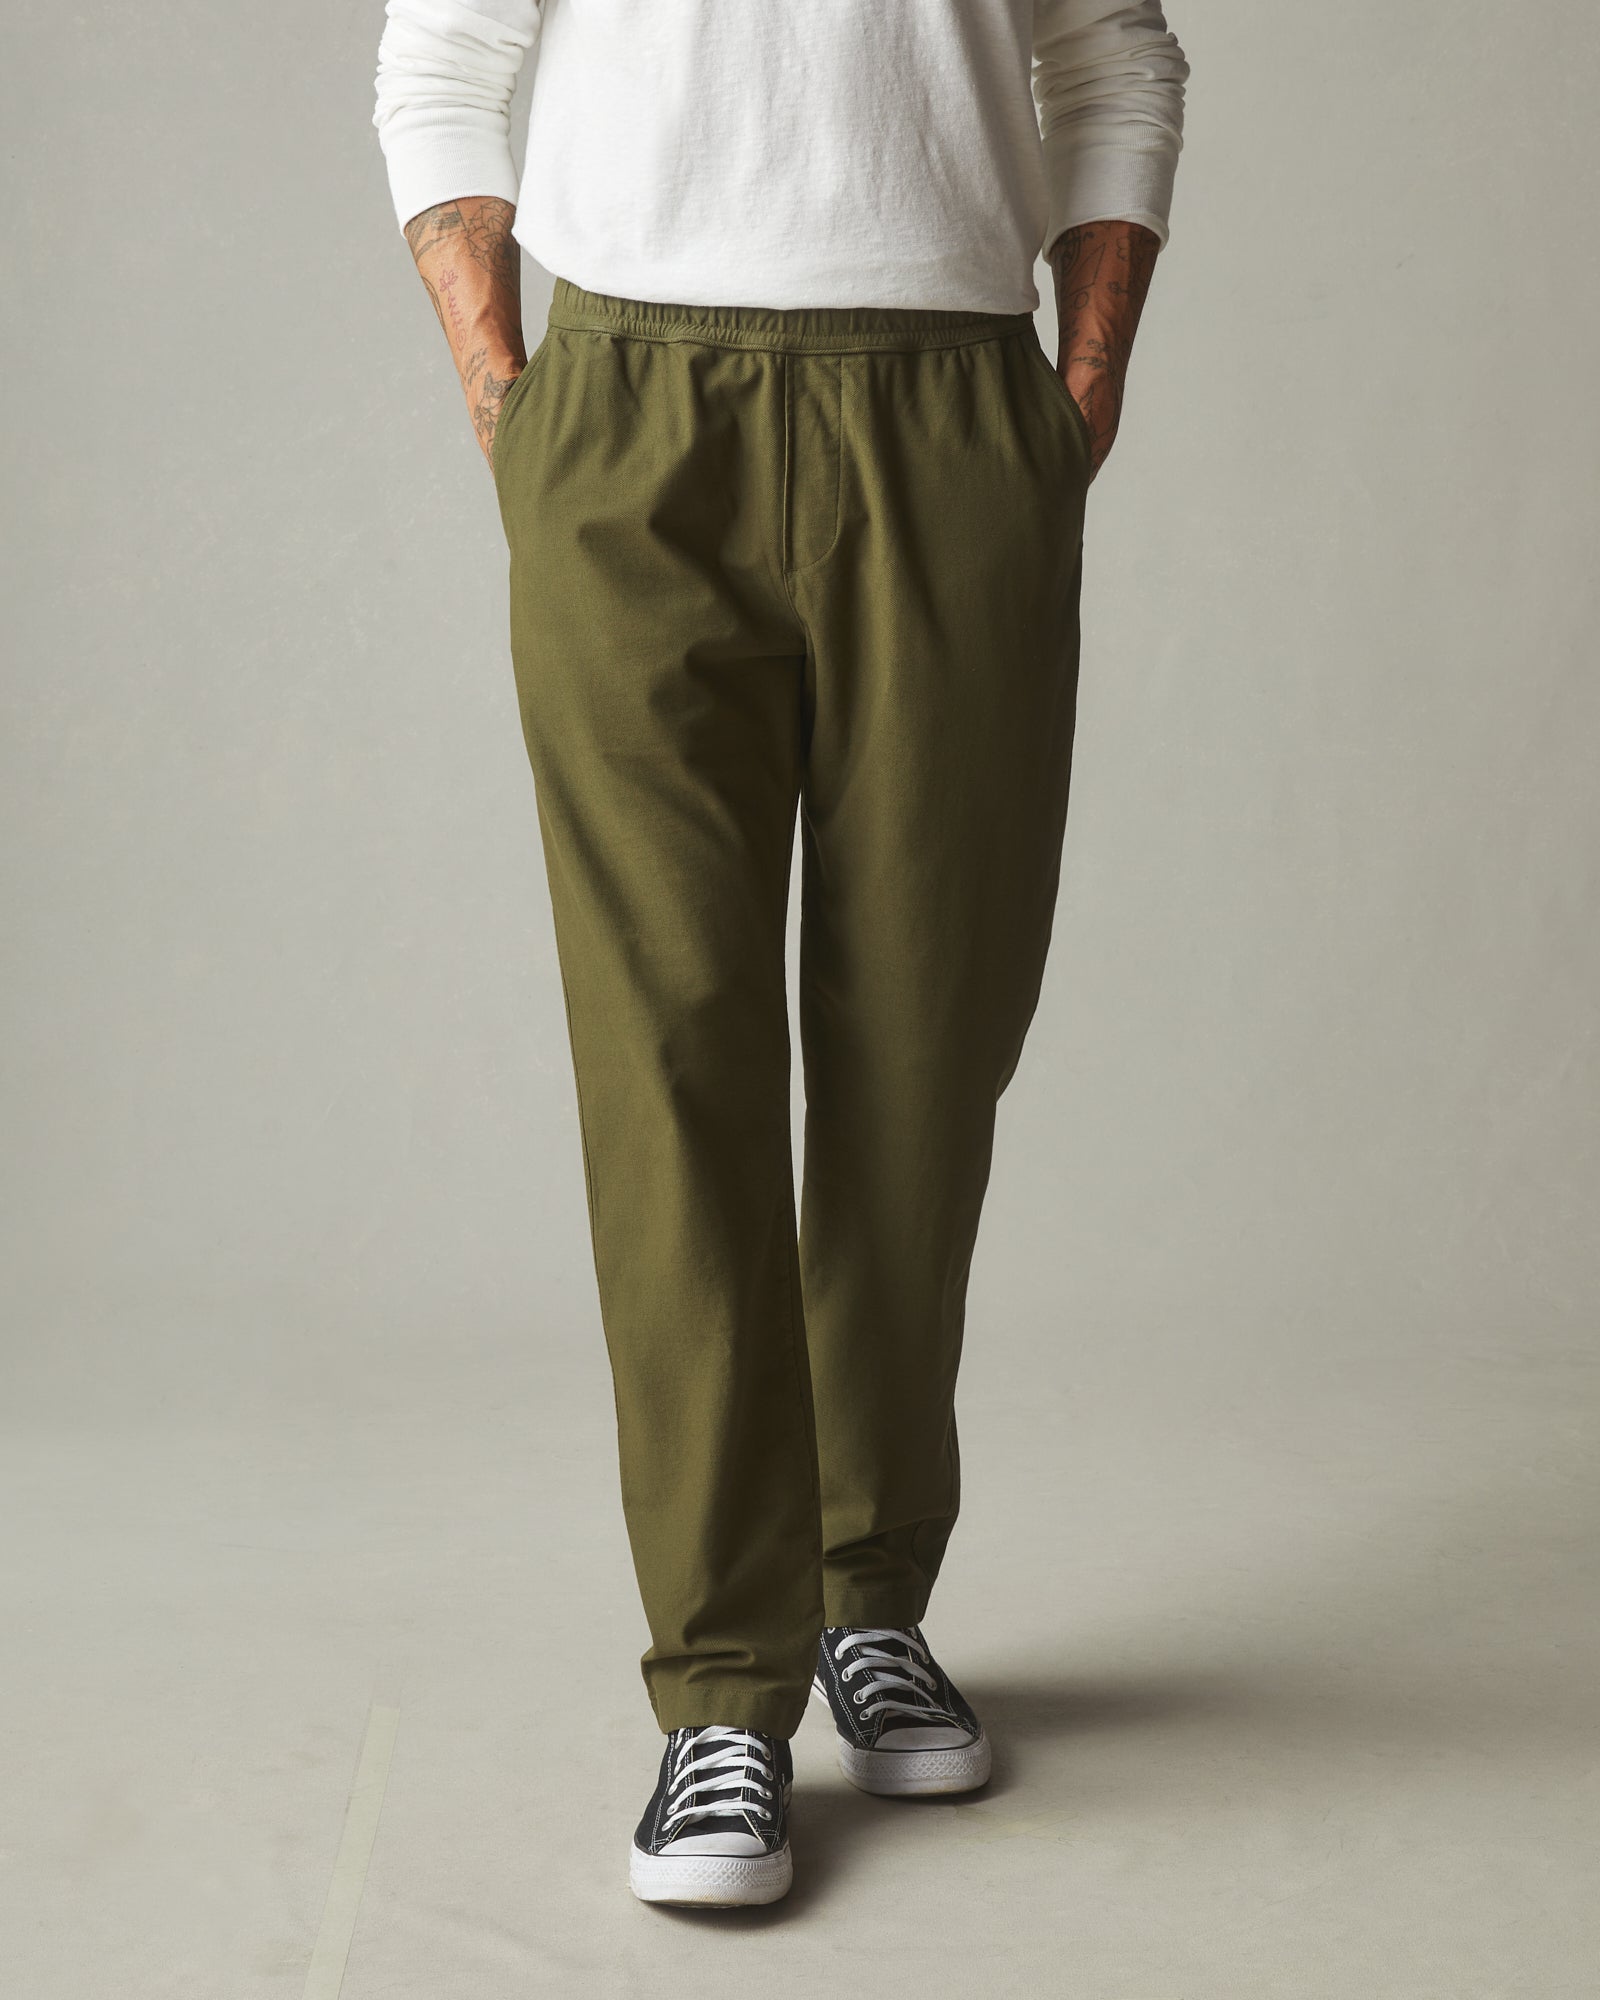 GALLERY DEPT. Slim-Fit Flared Cotton-Twill Trousers for Men | MR PORTER